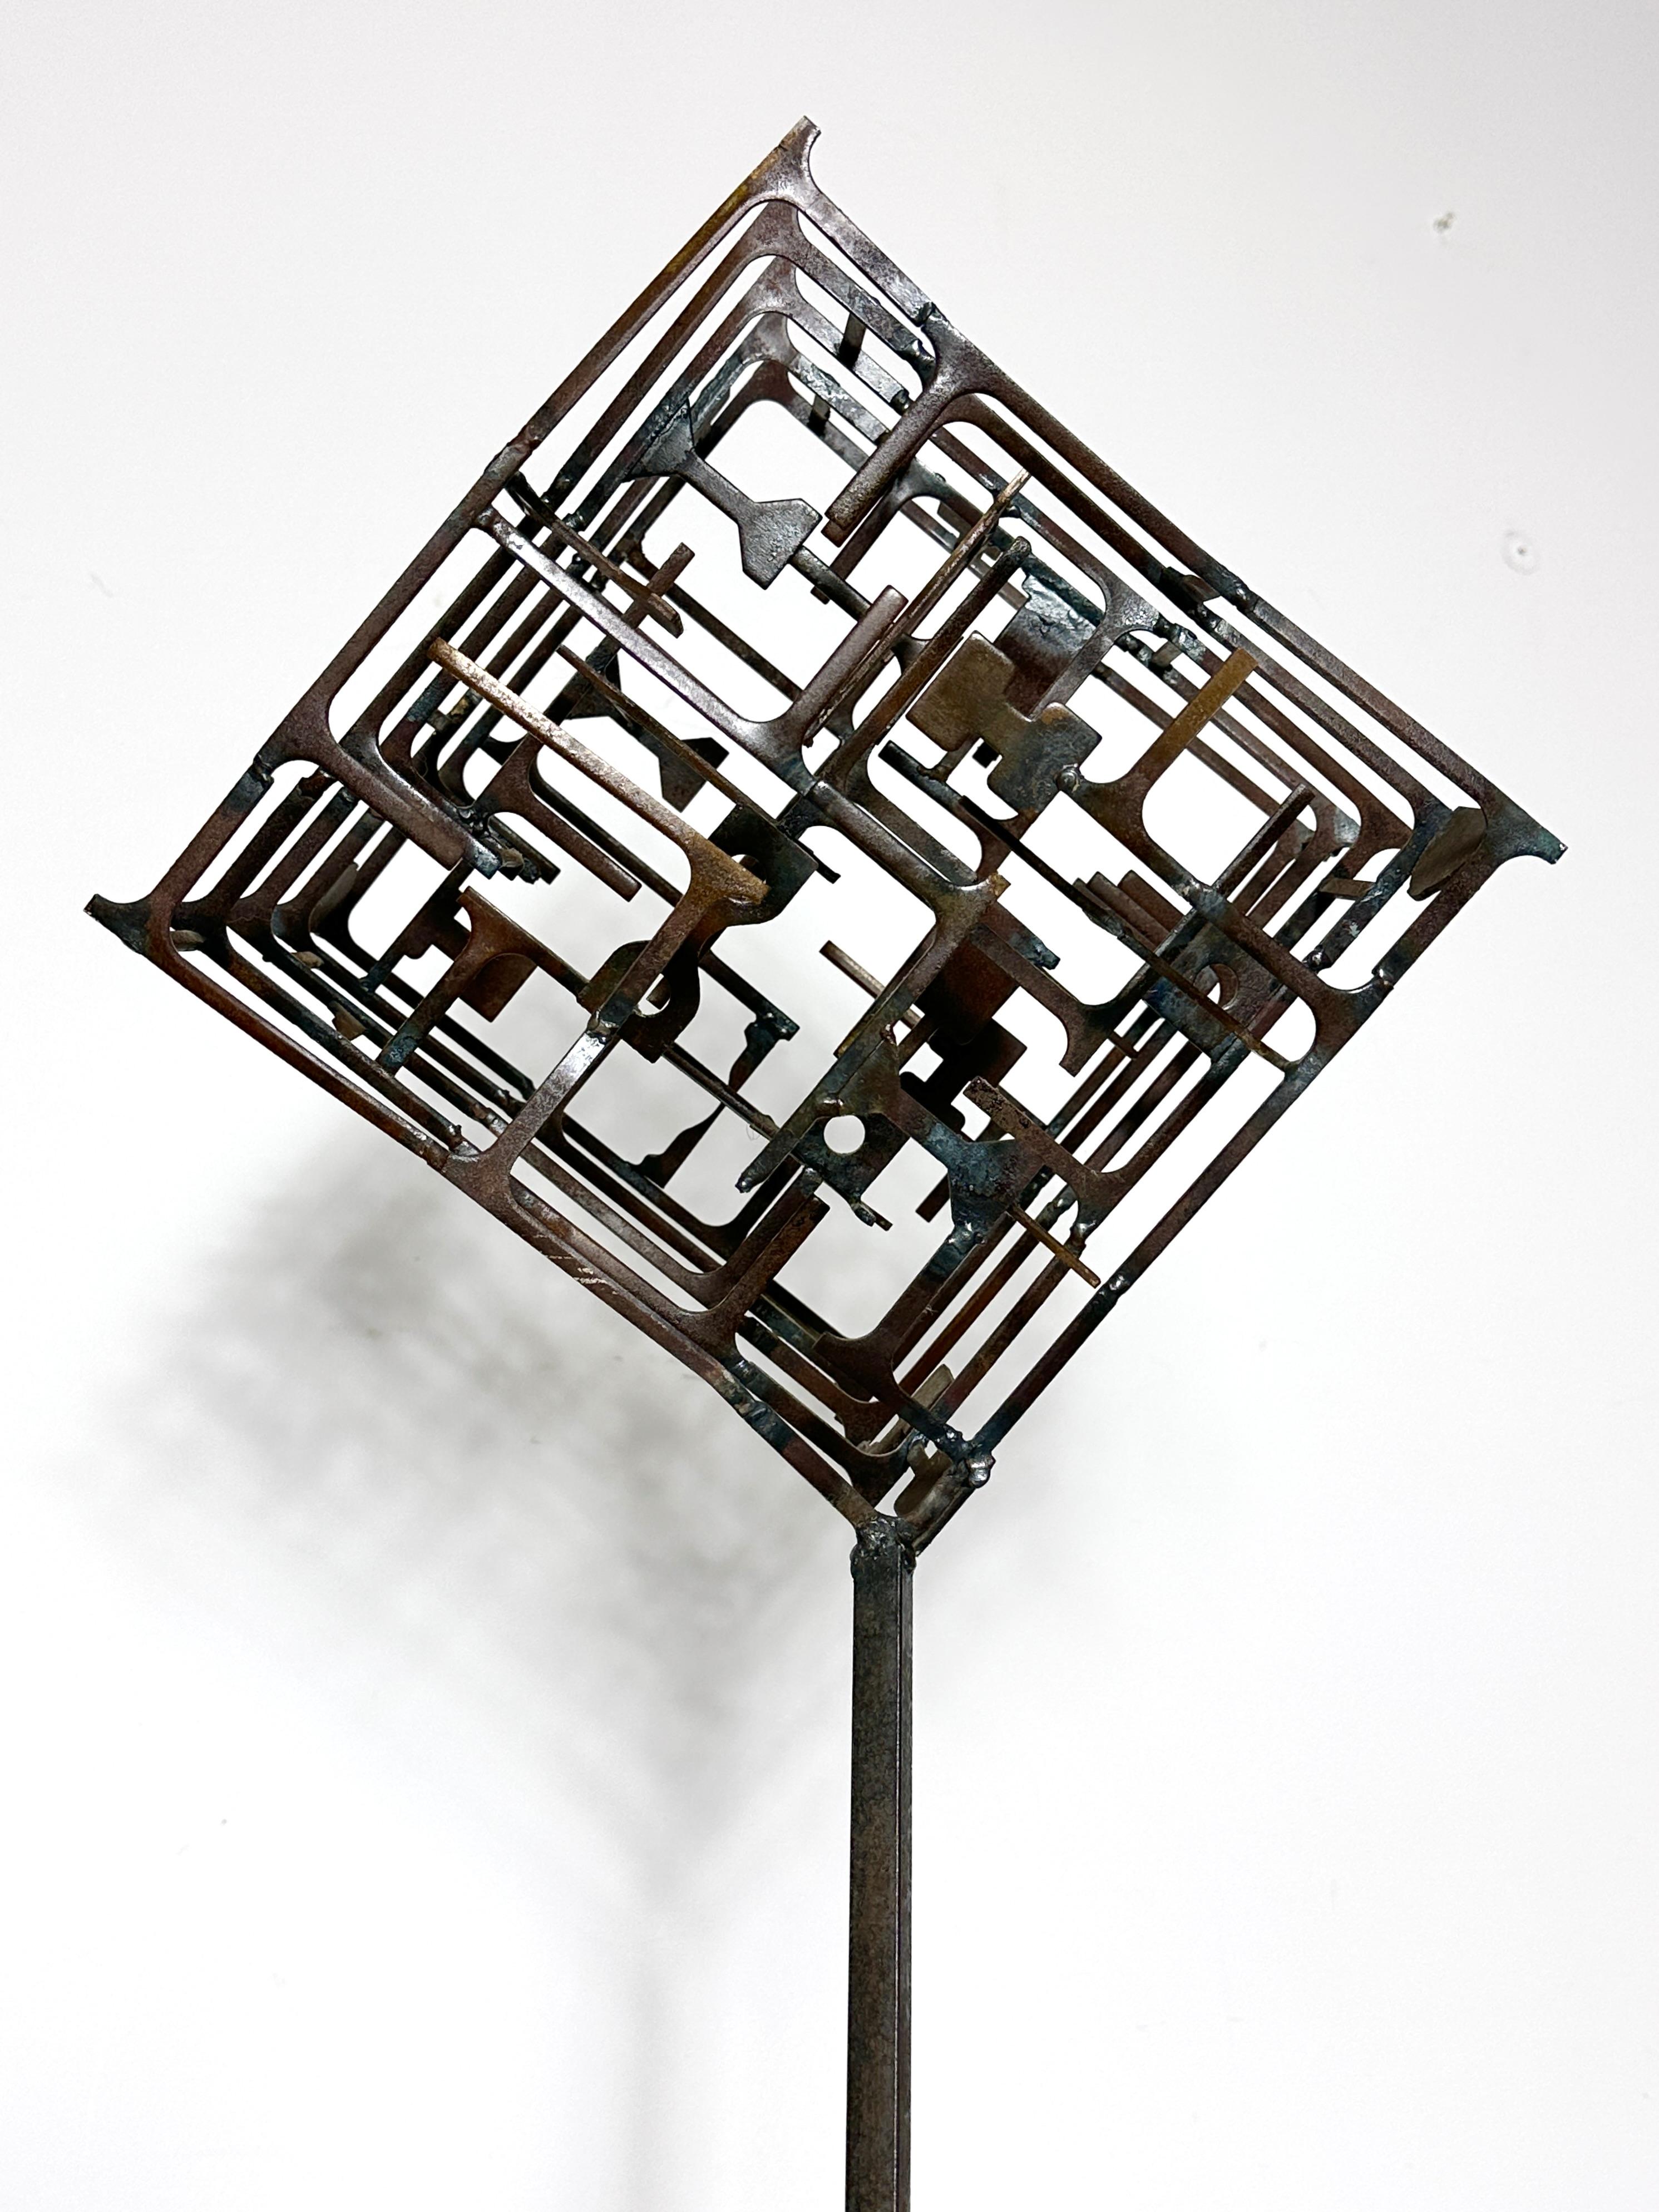 Abstract sculpture by Northern Ohio artist Fred Scott circa 1960s
Welded steel labyrinth cube mounted to wood and acrylic base
Acquired from the artist estate with original exhibition tags to base